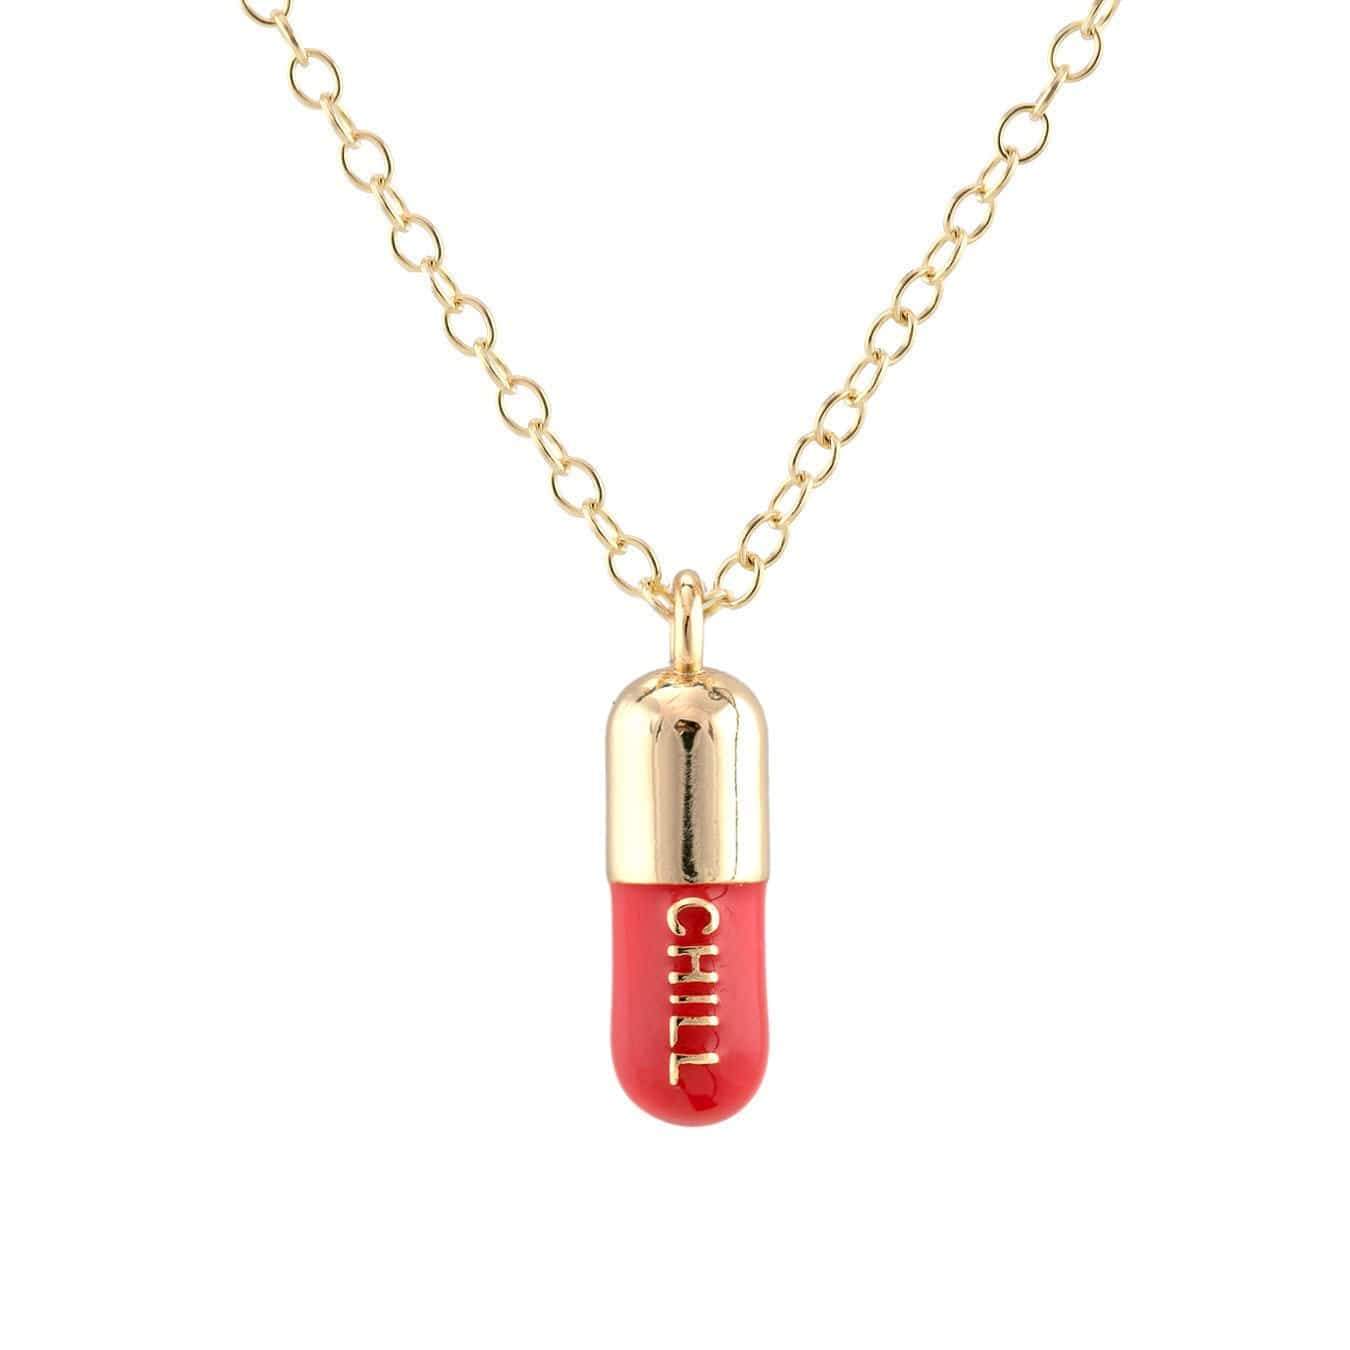 Women’s Chill Pill Enamel Necklace Gold Filled & Coral Red Enamel Kris Nations